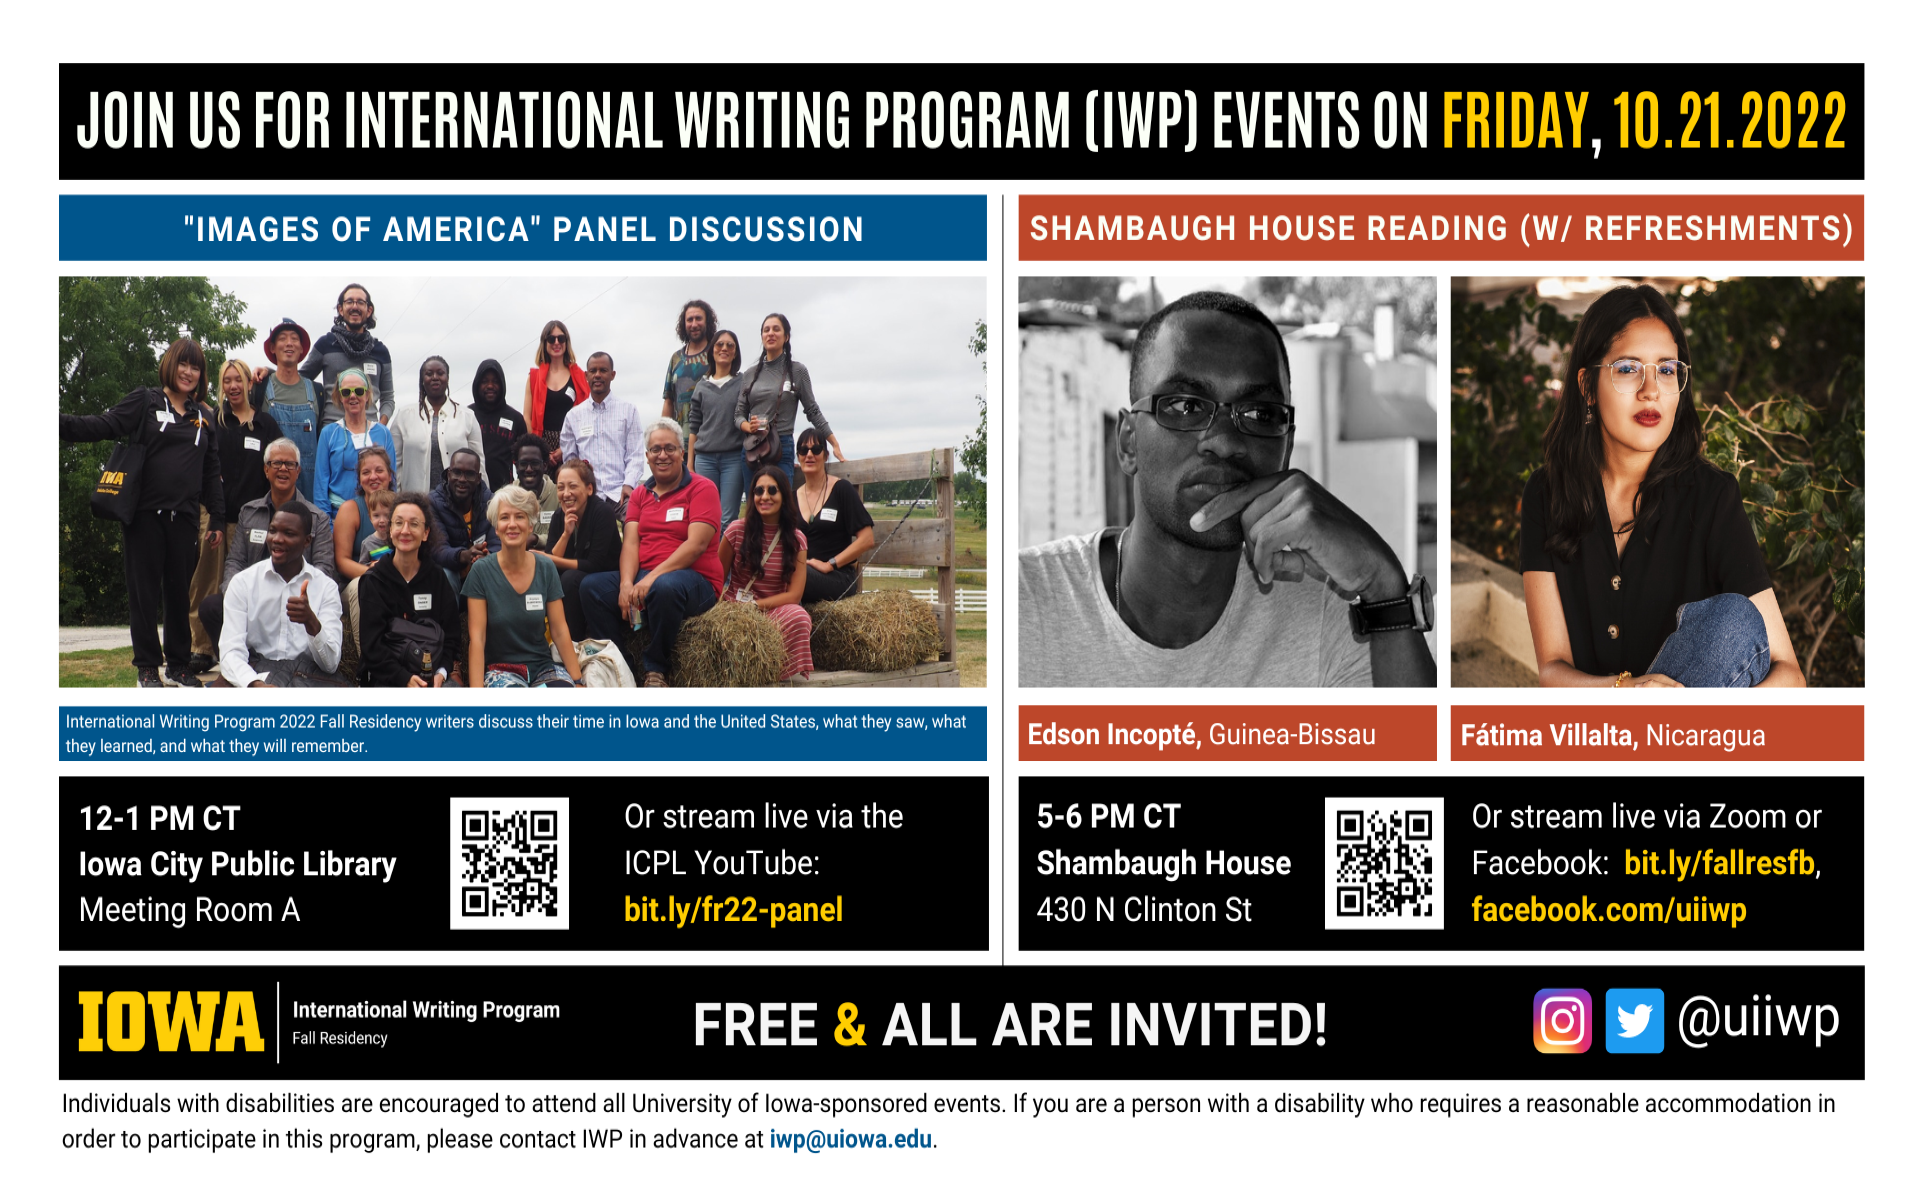 An image with two halves, each advertising one event. The image as a whole is labeled “Join us for International Writing Program (IWP) events on Friday, 10.21.2022.” The left half of the image is labeled, “'Images of America' Panel Discussion." There is a photo of many of the Fall Residency writers and staff together on a tractor ride. Text below the photo reads, "International Writing Program 2022 Fall Residency writers discuss their time in Iowa and the United States, what they saw, what they learned, and what they will remember. 12-1 PM CT, Iowa City Public Library, Meeting Room A. Or stream live via the ICPL YouTube:  bit.ly/fr22-panel." The right half of the image is labeled “Shambaugh House Reading w/ refreshments. It features portraits of two writers (named below) and the following text: "Edson Incopté, Guinea-Bissau. Fátima Villalta, Nicaragua. 5-6 PM CT, Shambaugh House, 430 N. Clinton St. Or stream live via Zoom or Facebook: bit.ly/fallresfb, facebook.com/uiiwp.” Below that text there are the IWP Fall Residency logo, the Instagram and Twitter handle @uiiwp, and a note that the event is “Free & All Are Invited.” The following text is at the bottom of the image: "Individuals with disabilities are encouraged to attend all University of Iowa-sponsored events. If you are a person with a disability who requires a reasonable accommodation in order to participate in this program, please contact IWP in advance at iwp@uiowa.edu.”